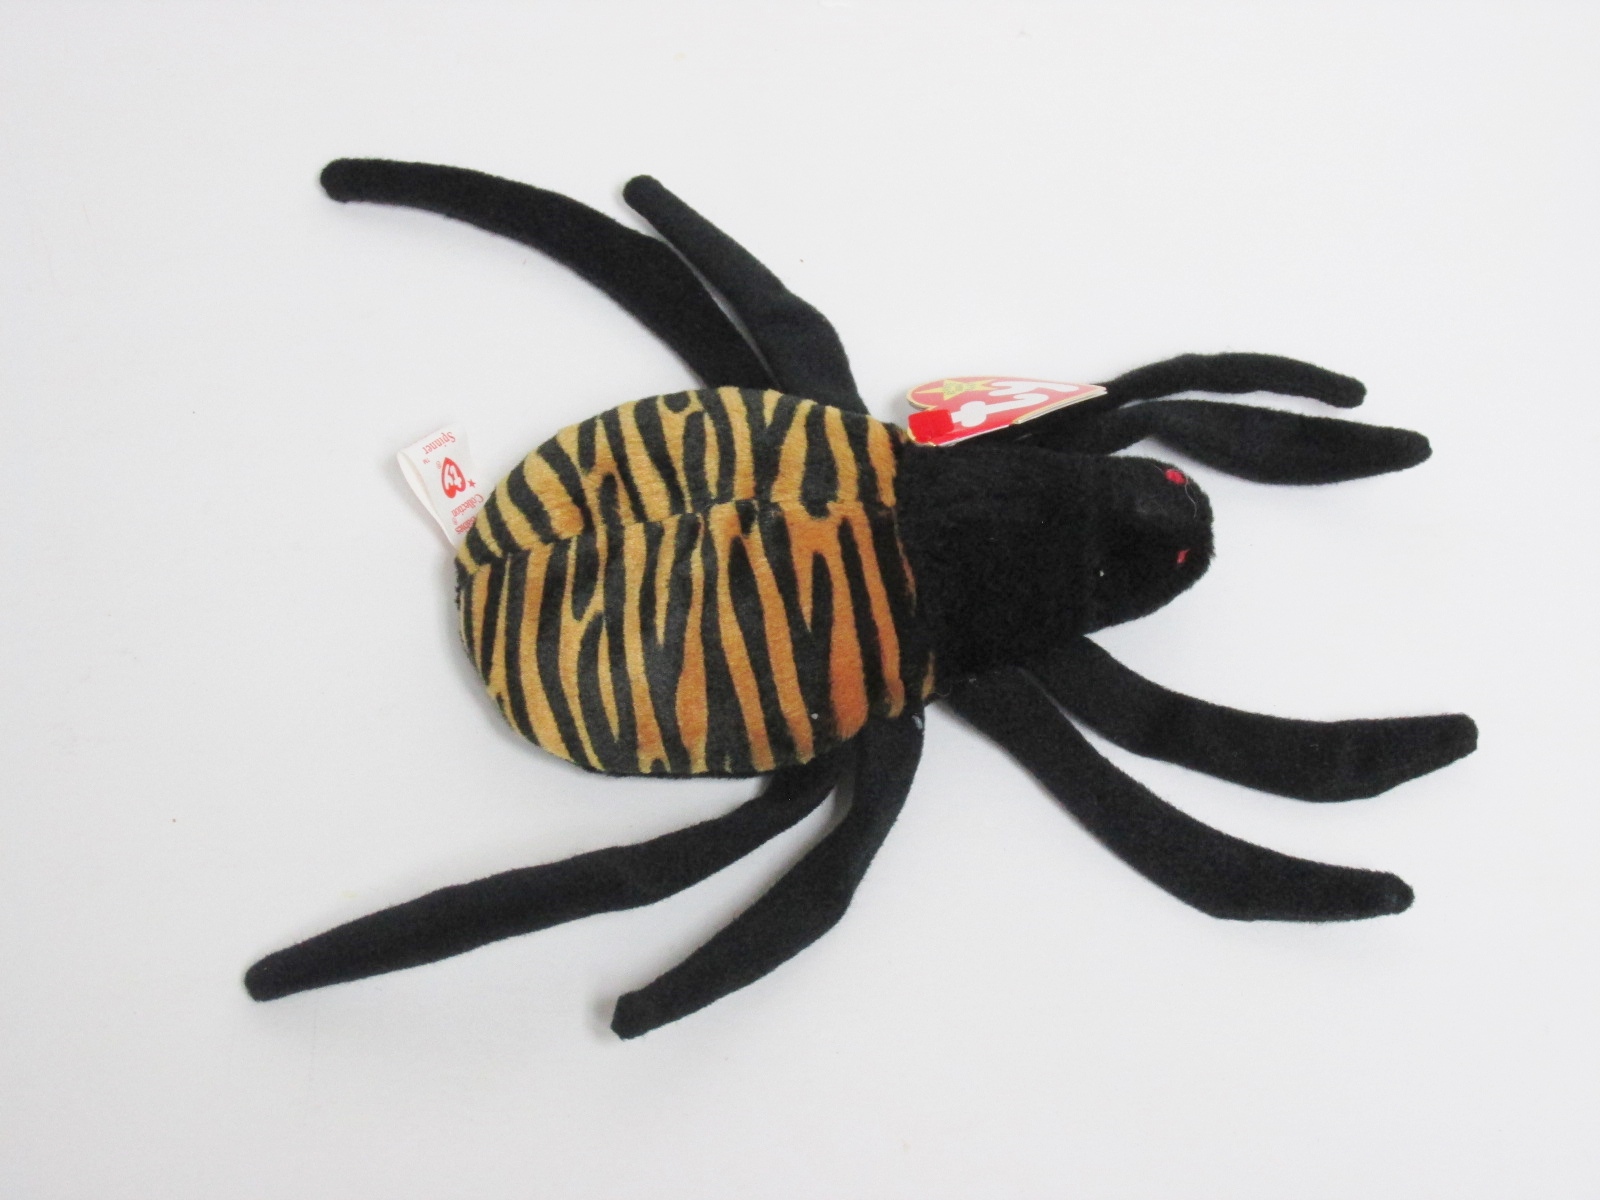 Ty Beanie Baby: Spinner the Spider, Stuffed Animal